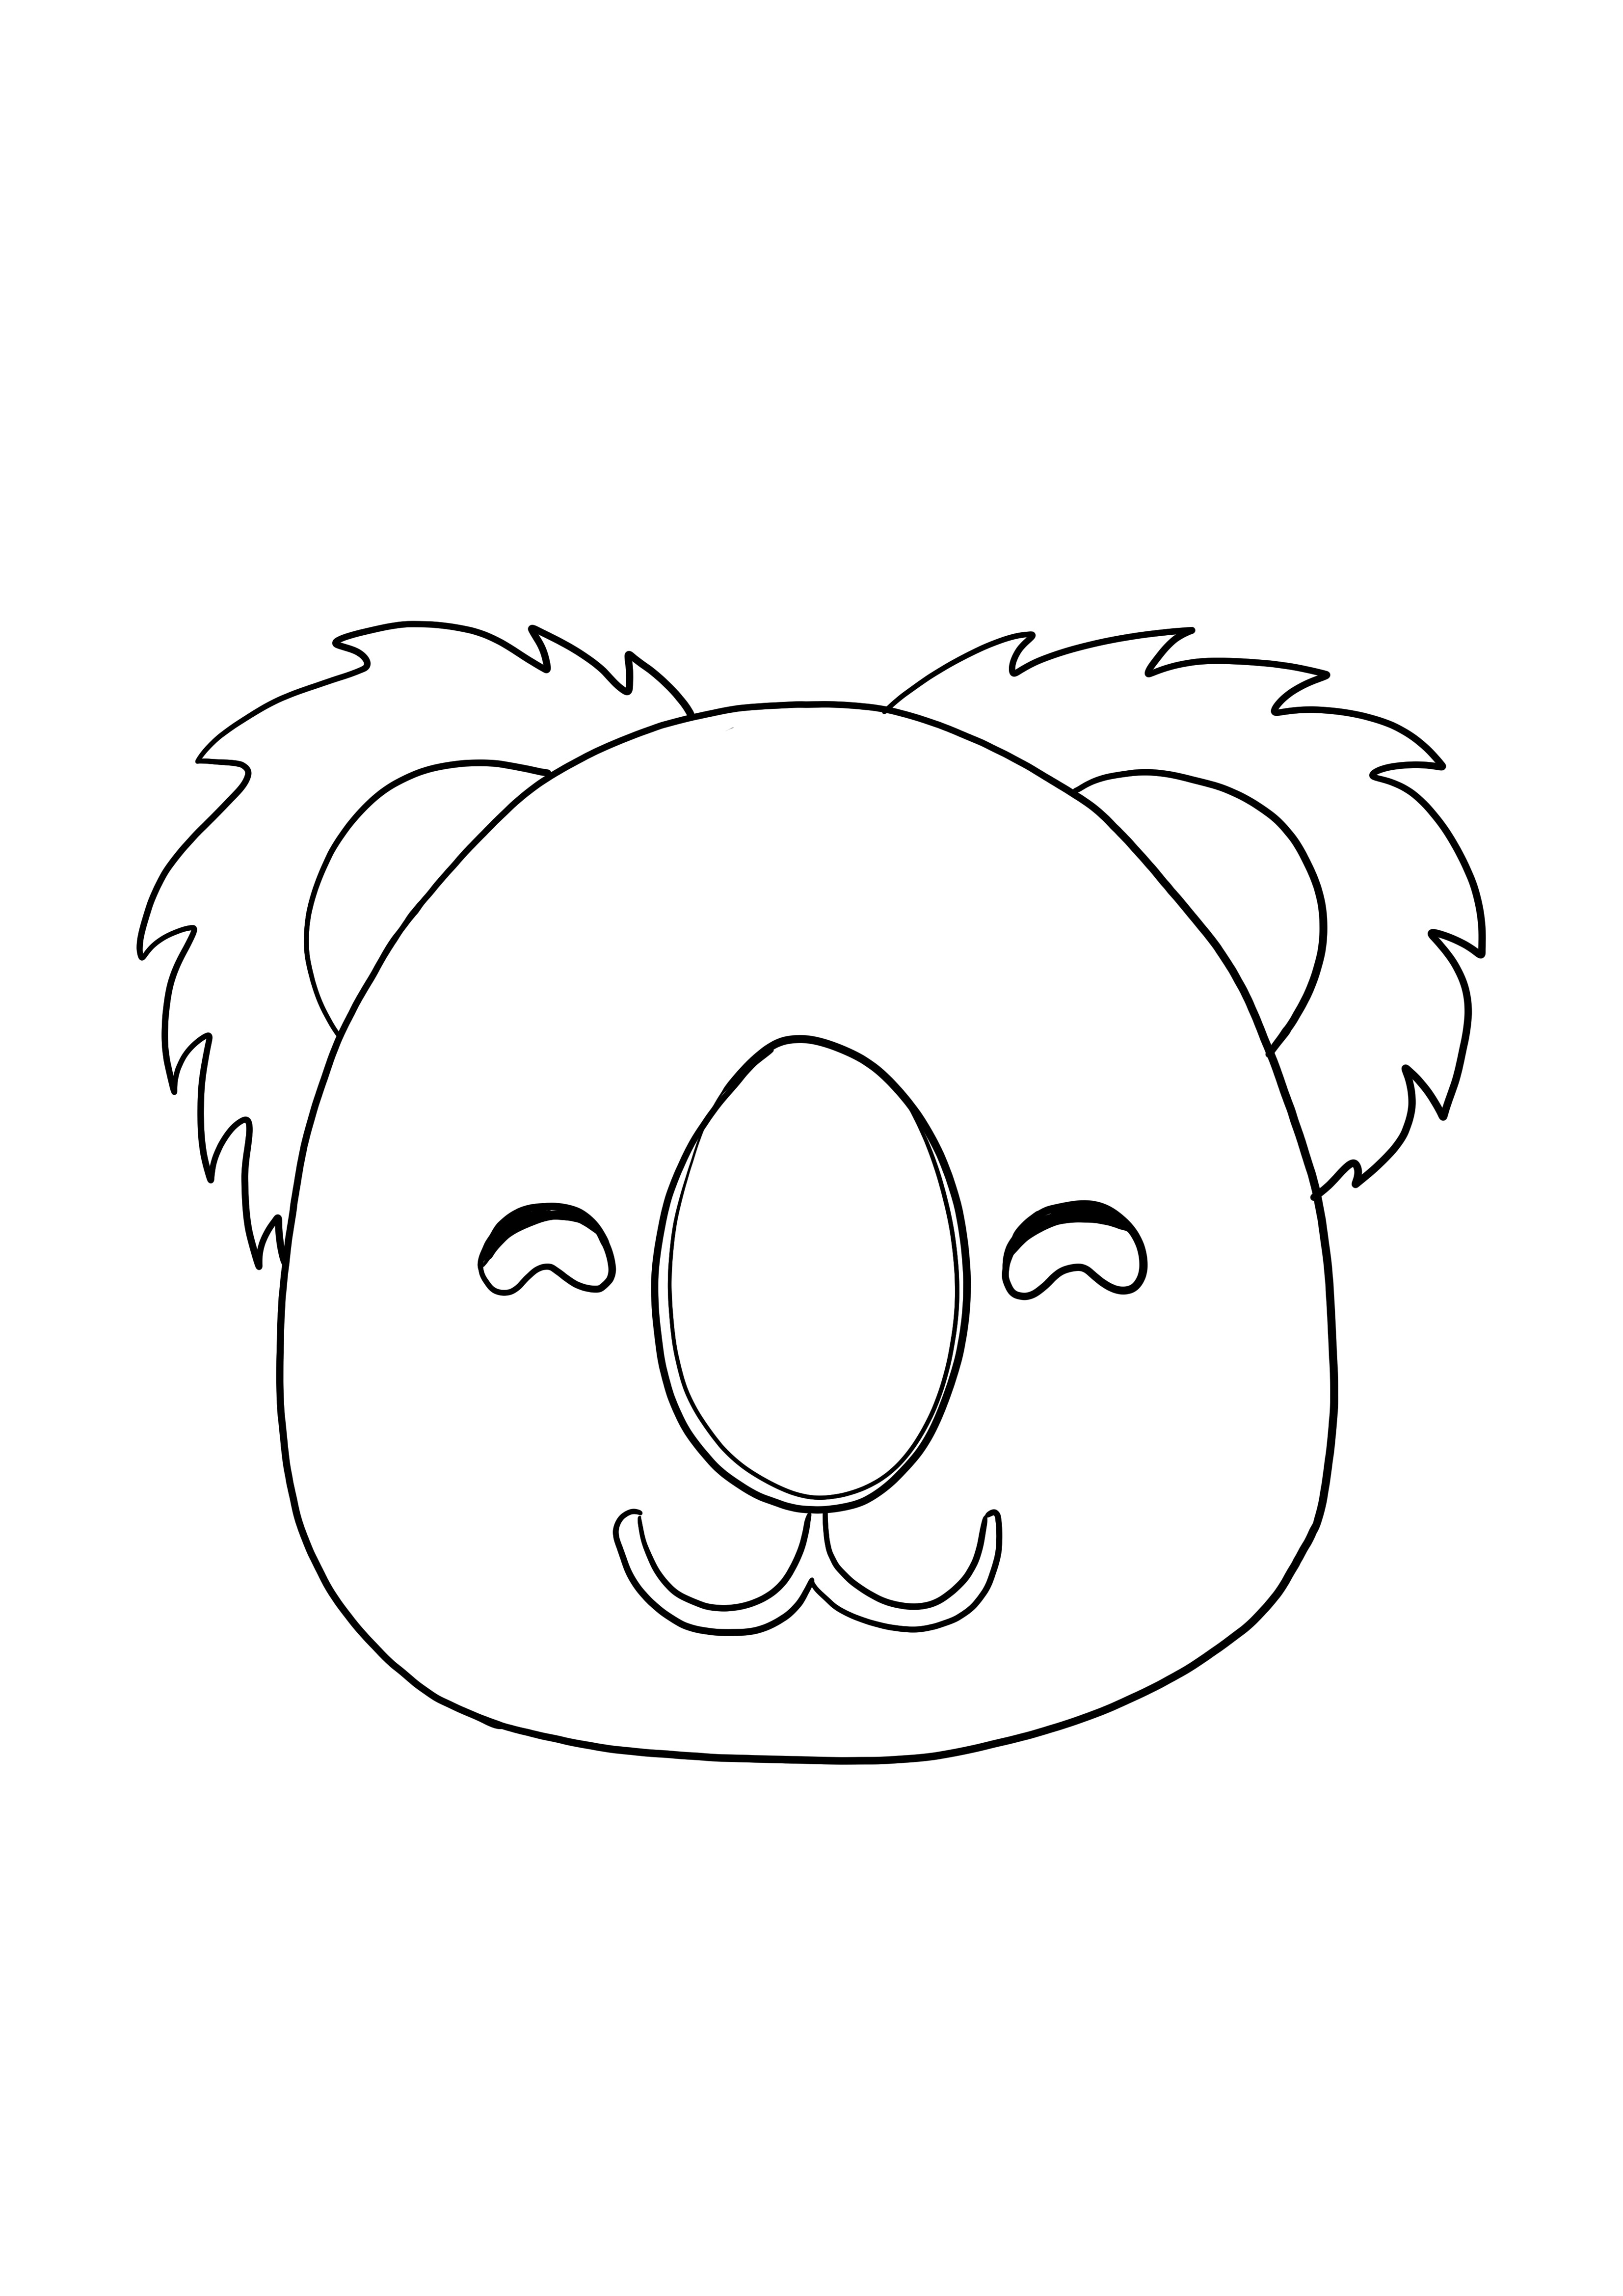 Koala's face smiling coloring image for kids for free